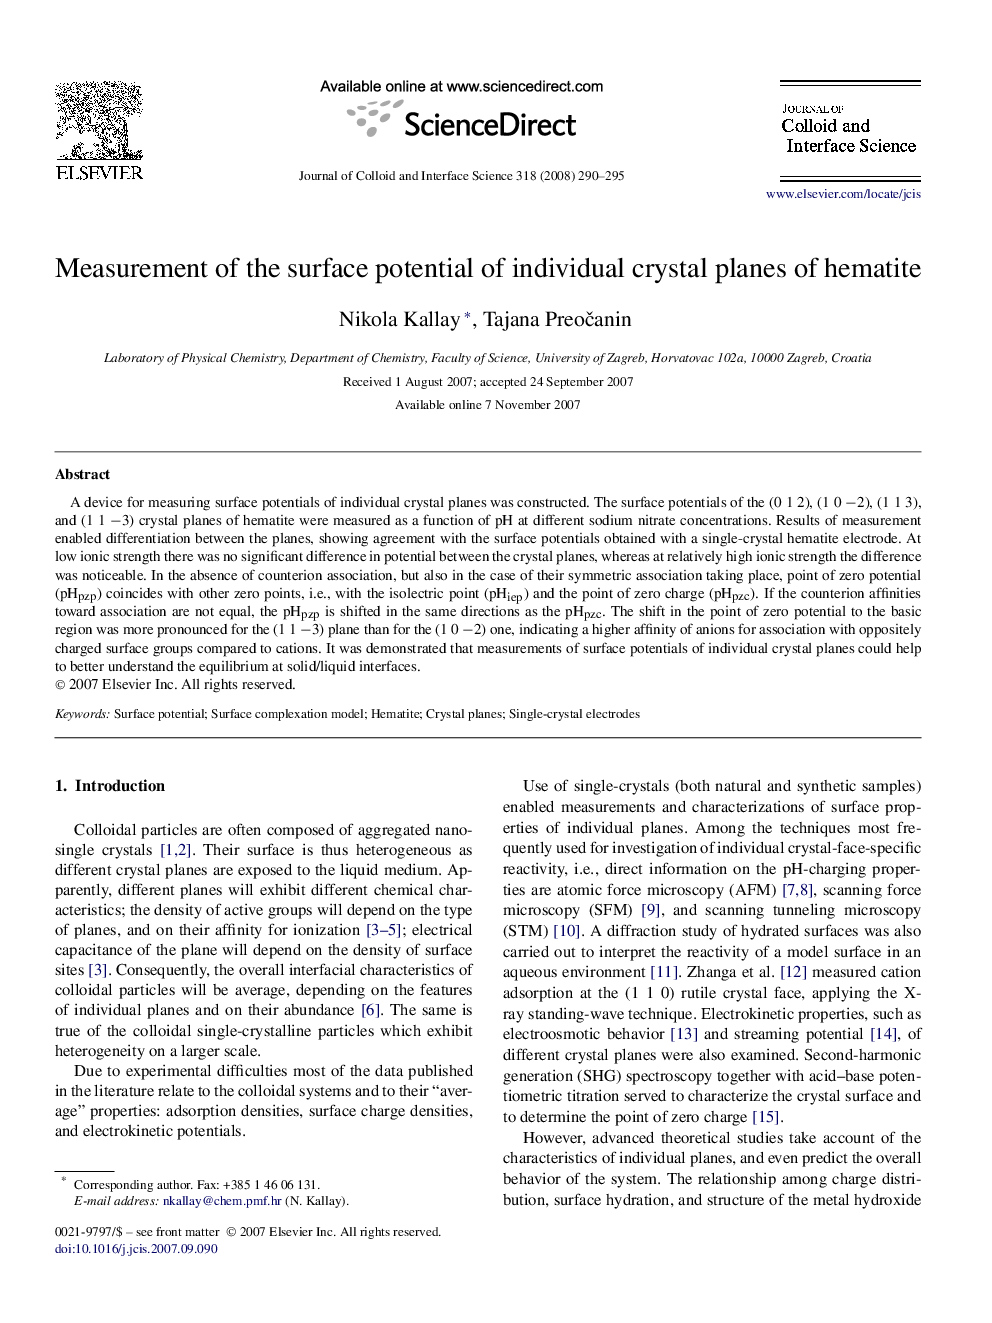 Measurement of the surface potential of individual crystal planes of hematite